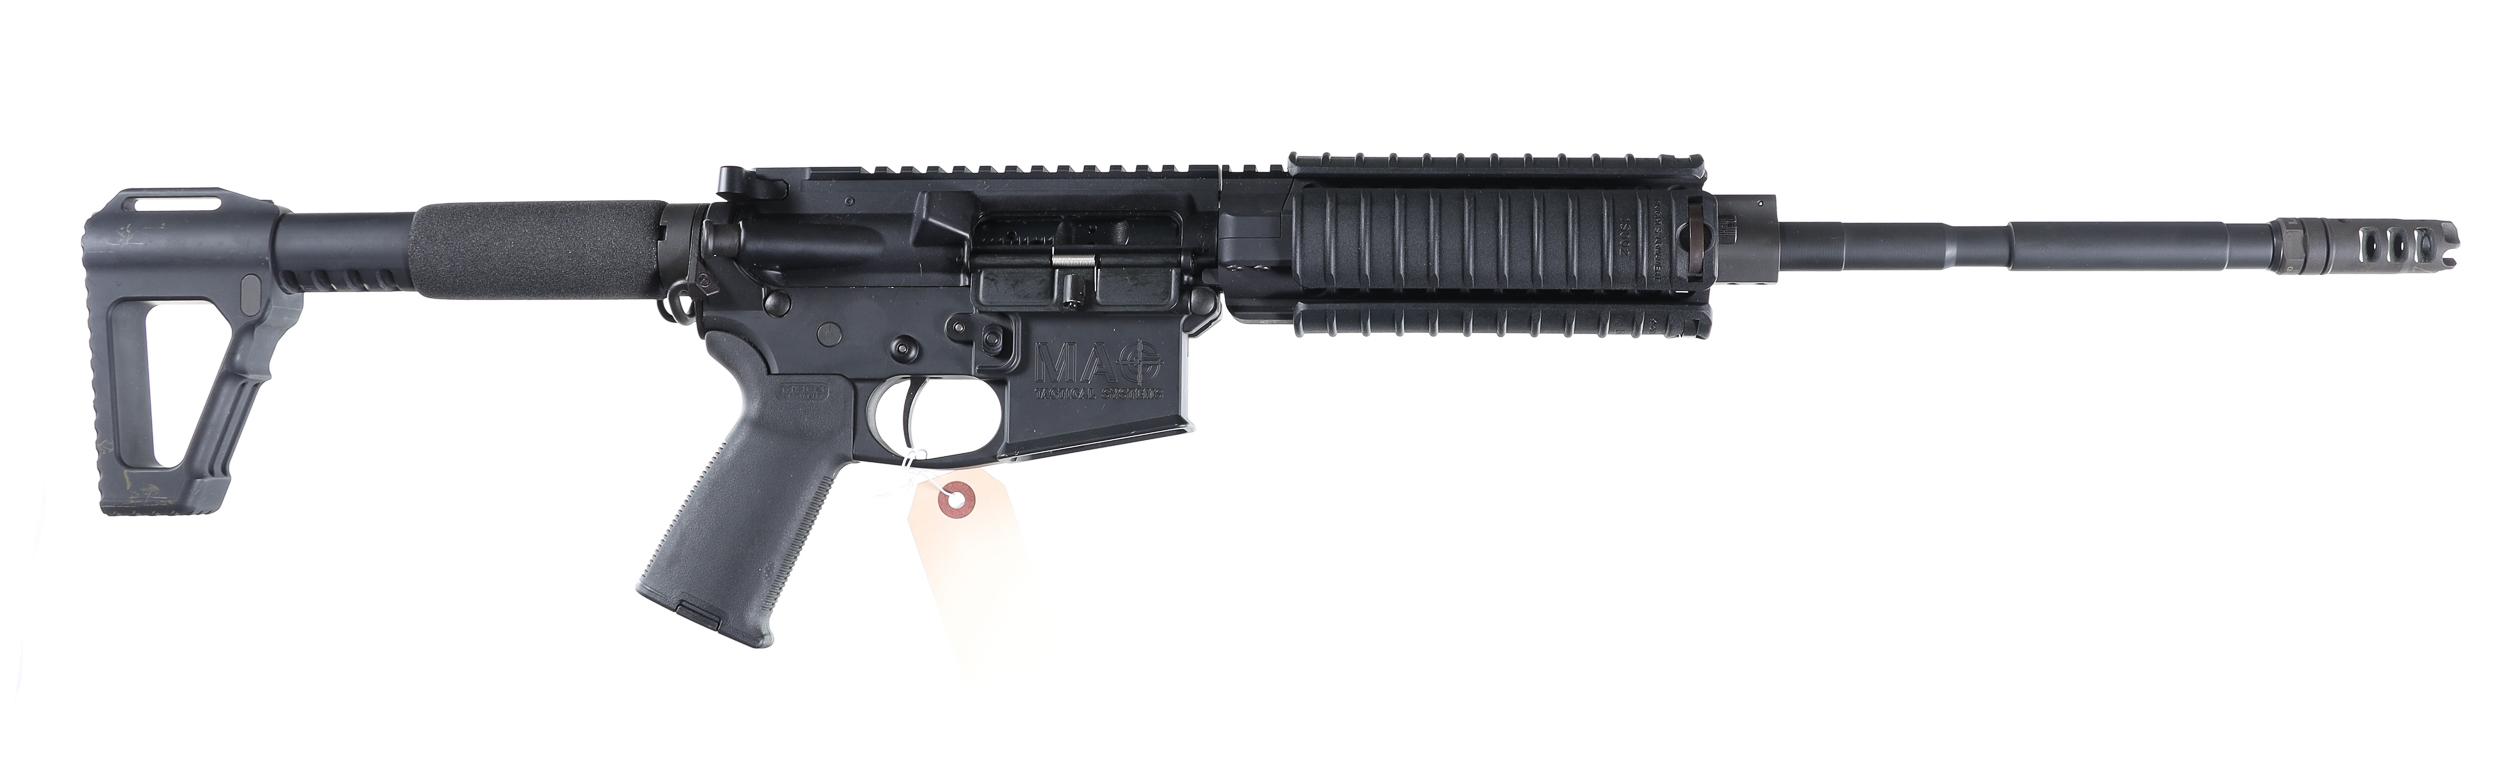 MAG Tactical Systems MG-G4 Semi Rifle 5.56mm